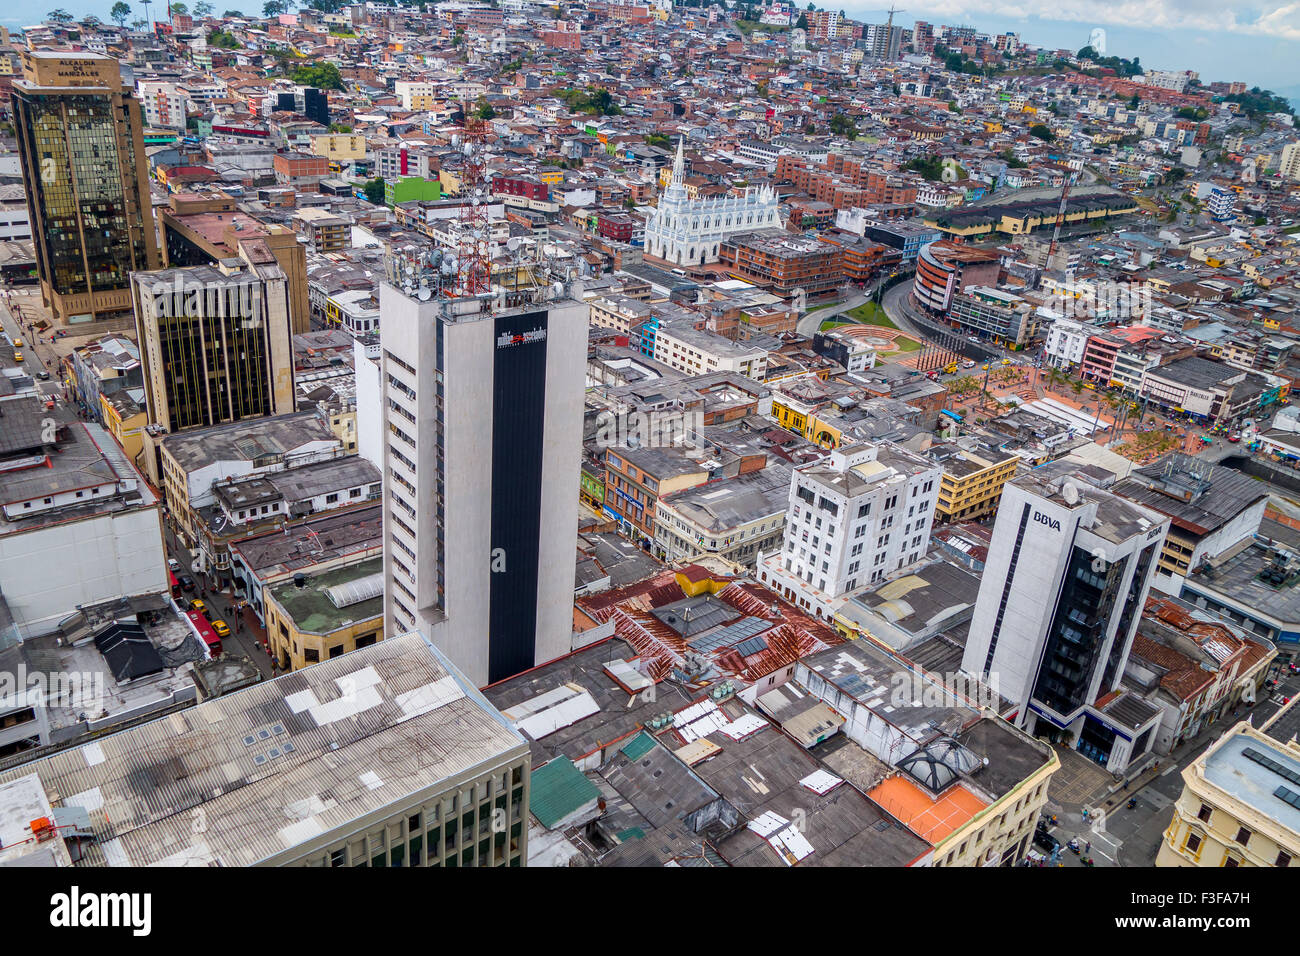 Manizales city in Colombia Stock Photo